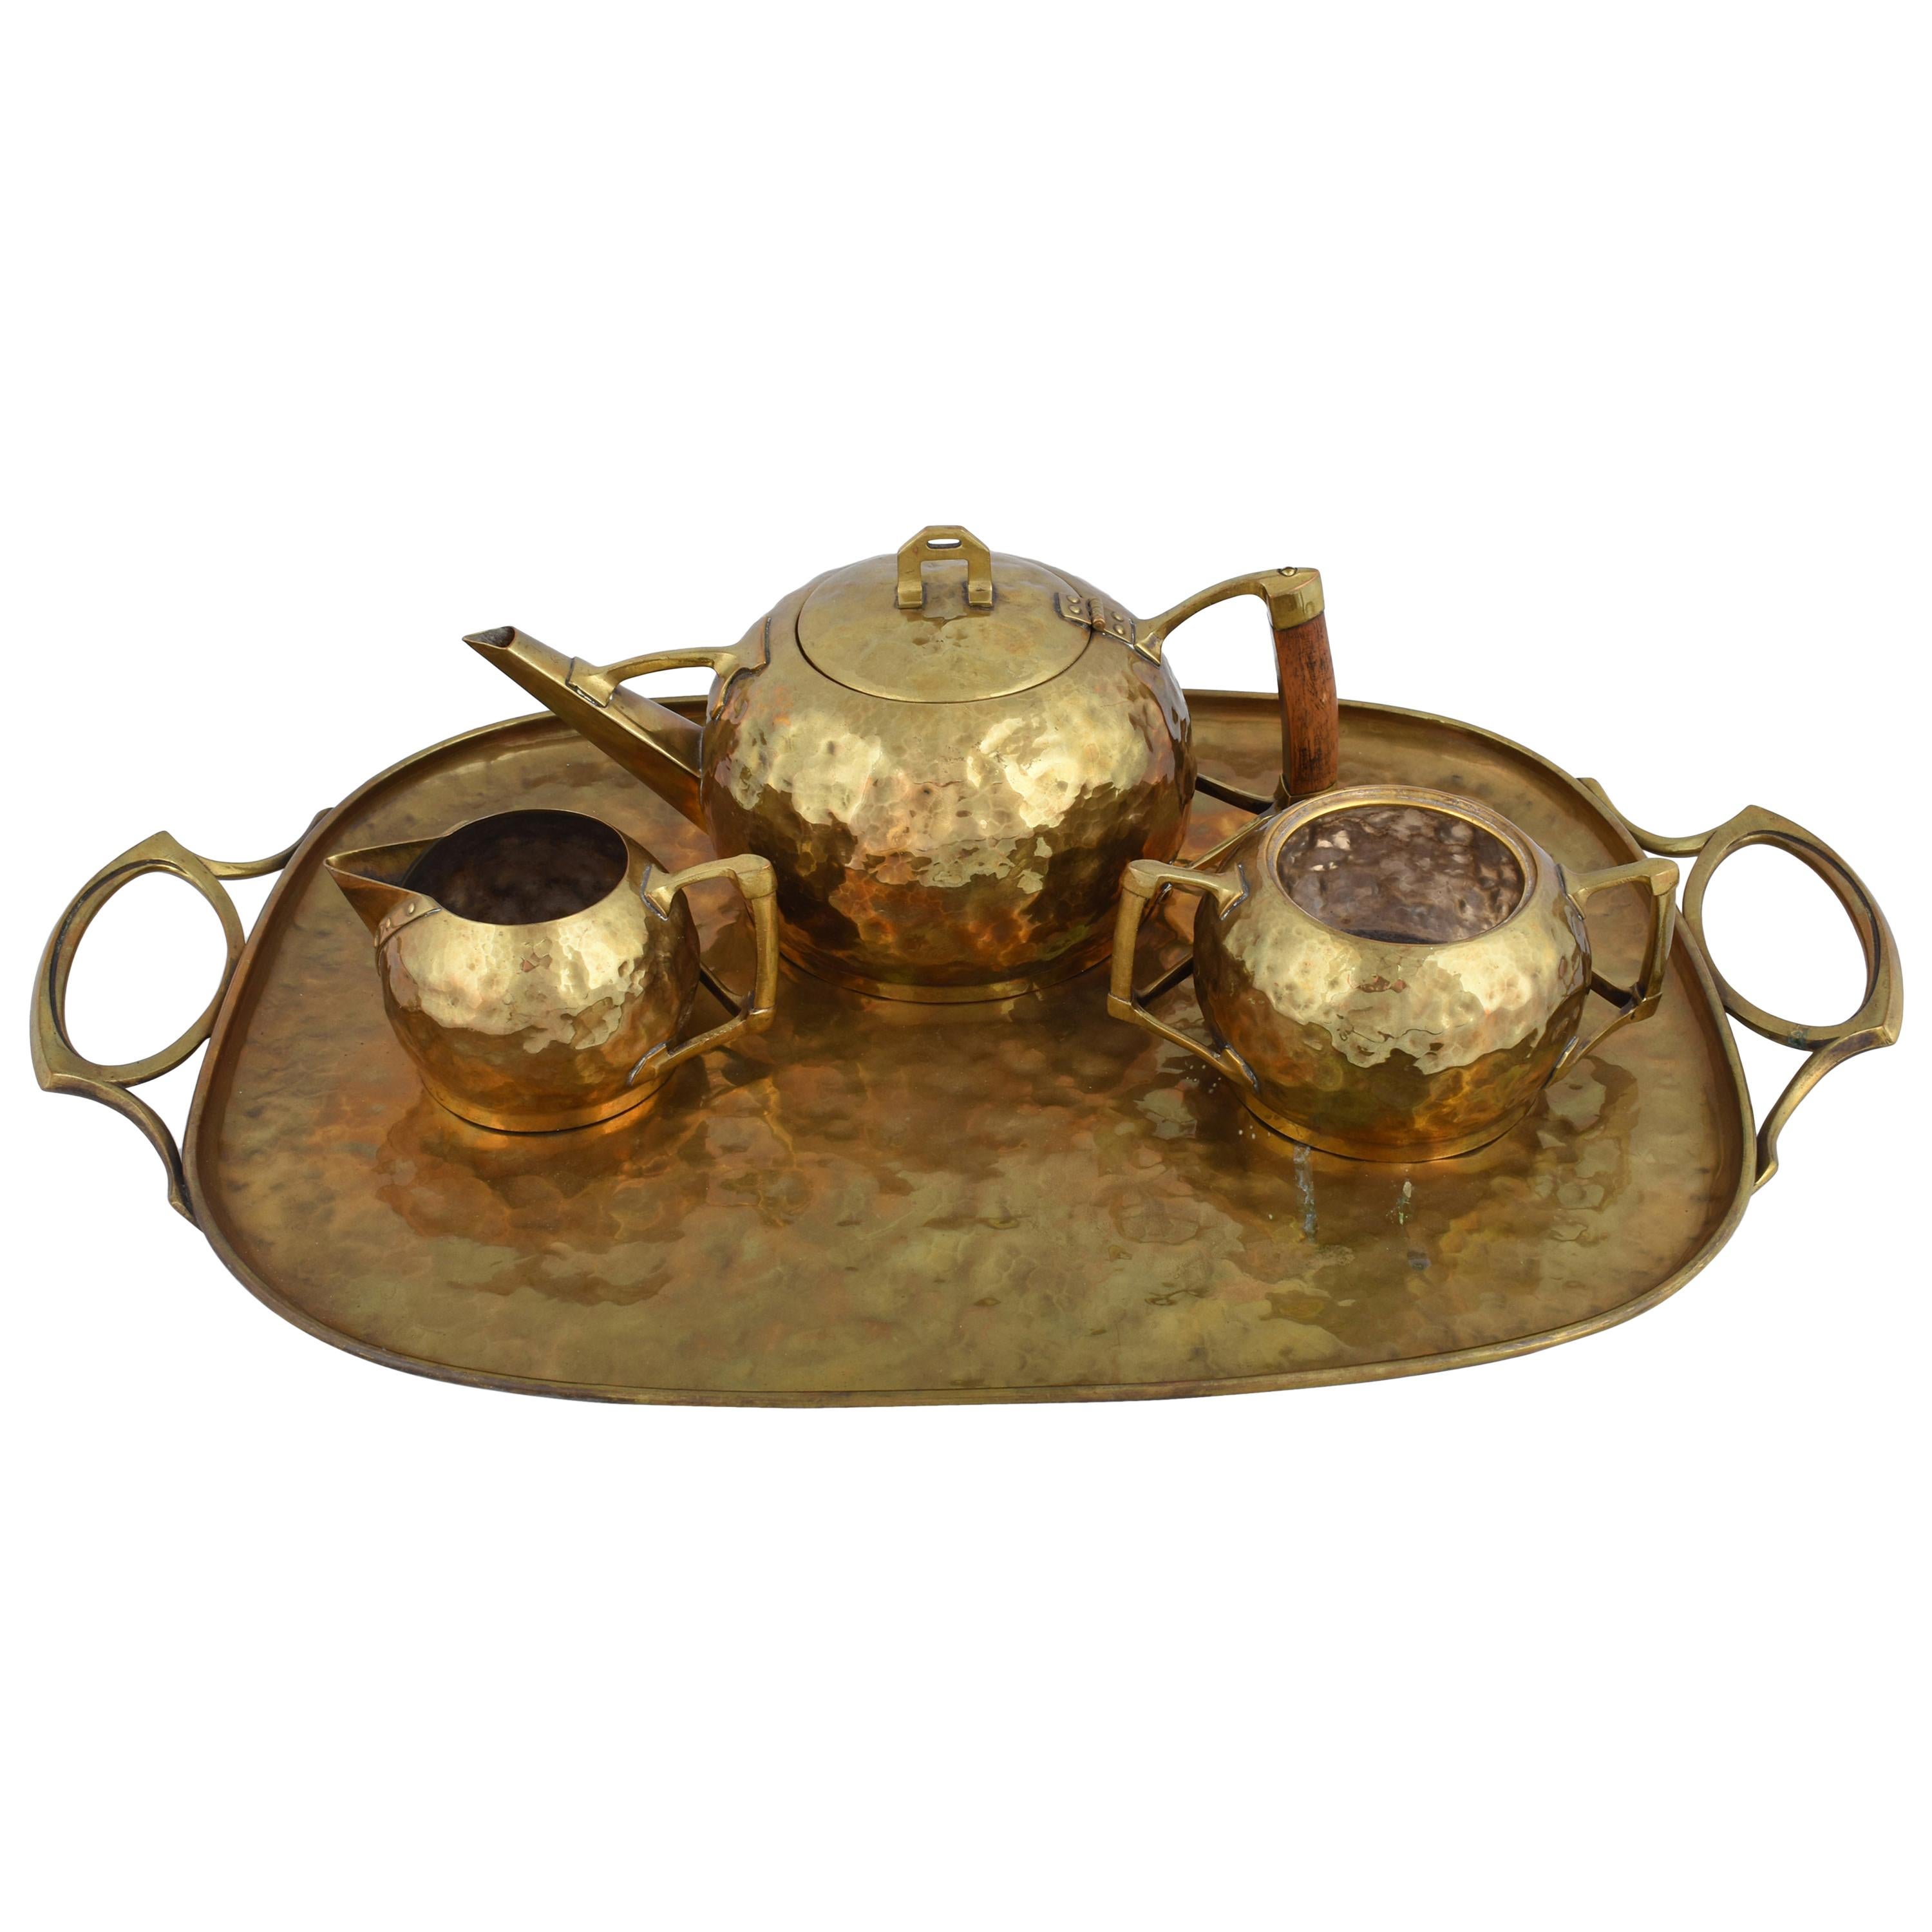 Jugenstil Brass Centrepiece / Teaset with Tray by Carl Deffner, Germany, 1910s